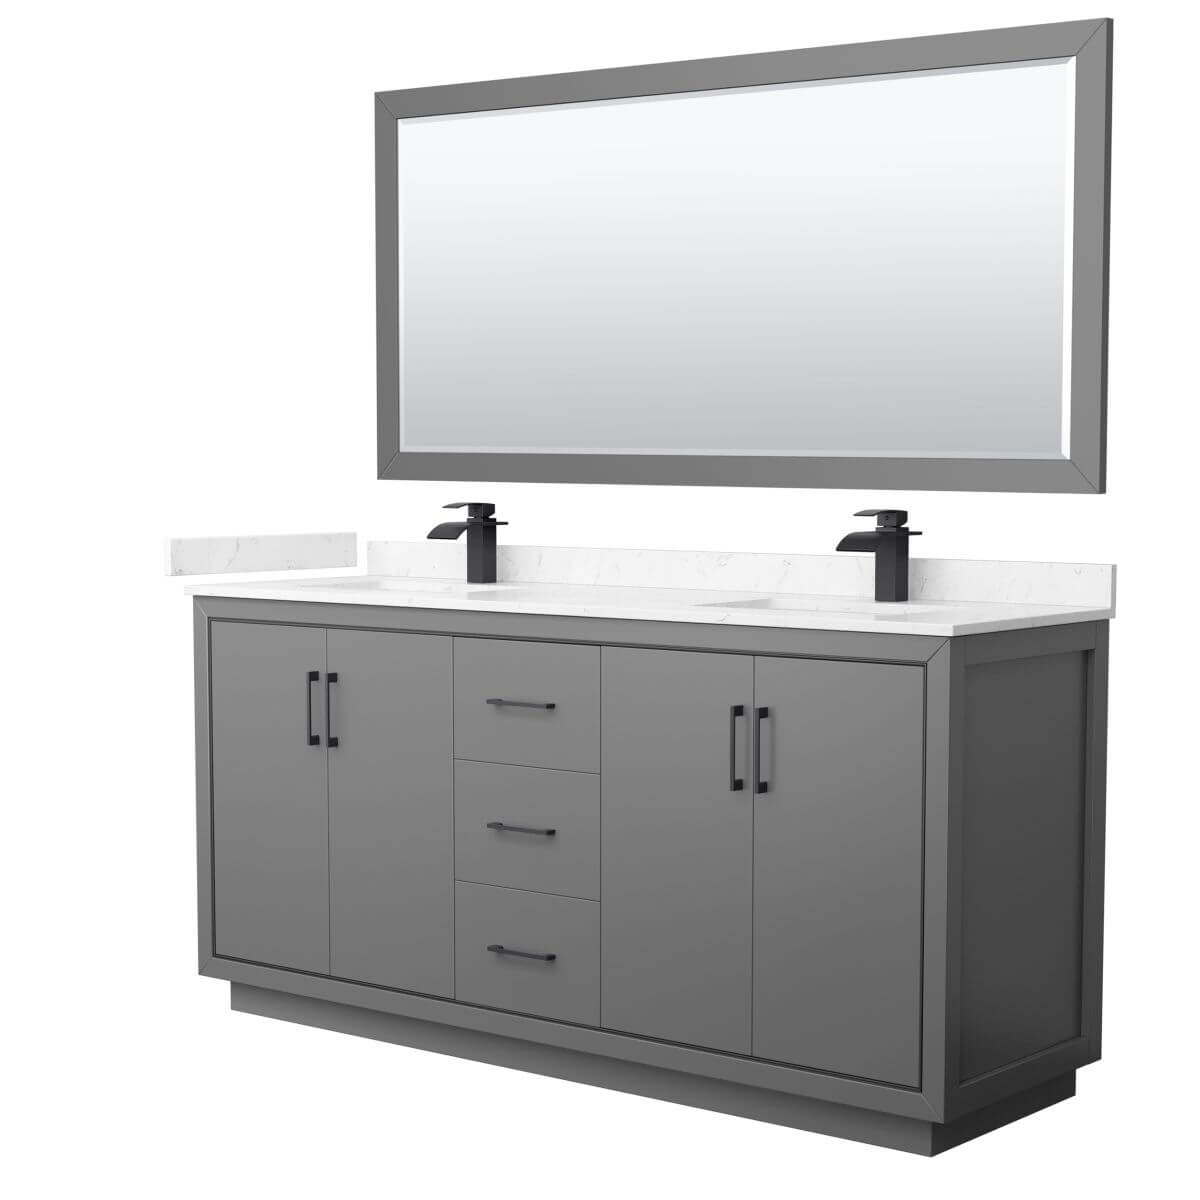 Wyndham Collection WCF111172DGBC2UNSM70 Icon 72 inch Double Bathroom Vanity in Dark Gray with Carrara Cultured Marble Countertop, Undermount Square Sinks, Matte Black Trim and 70 Inch Mirror